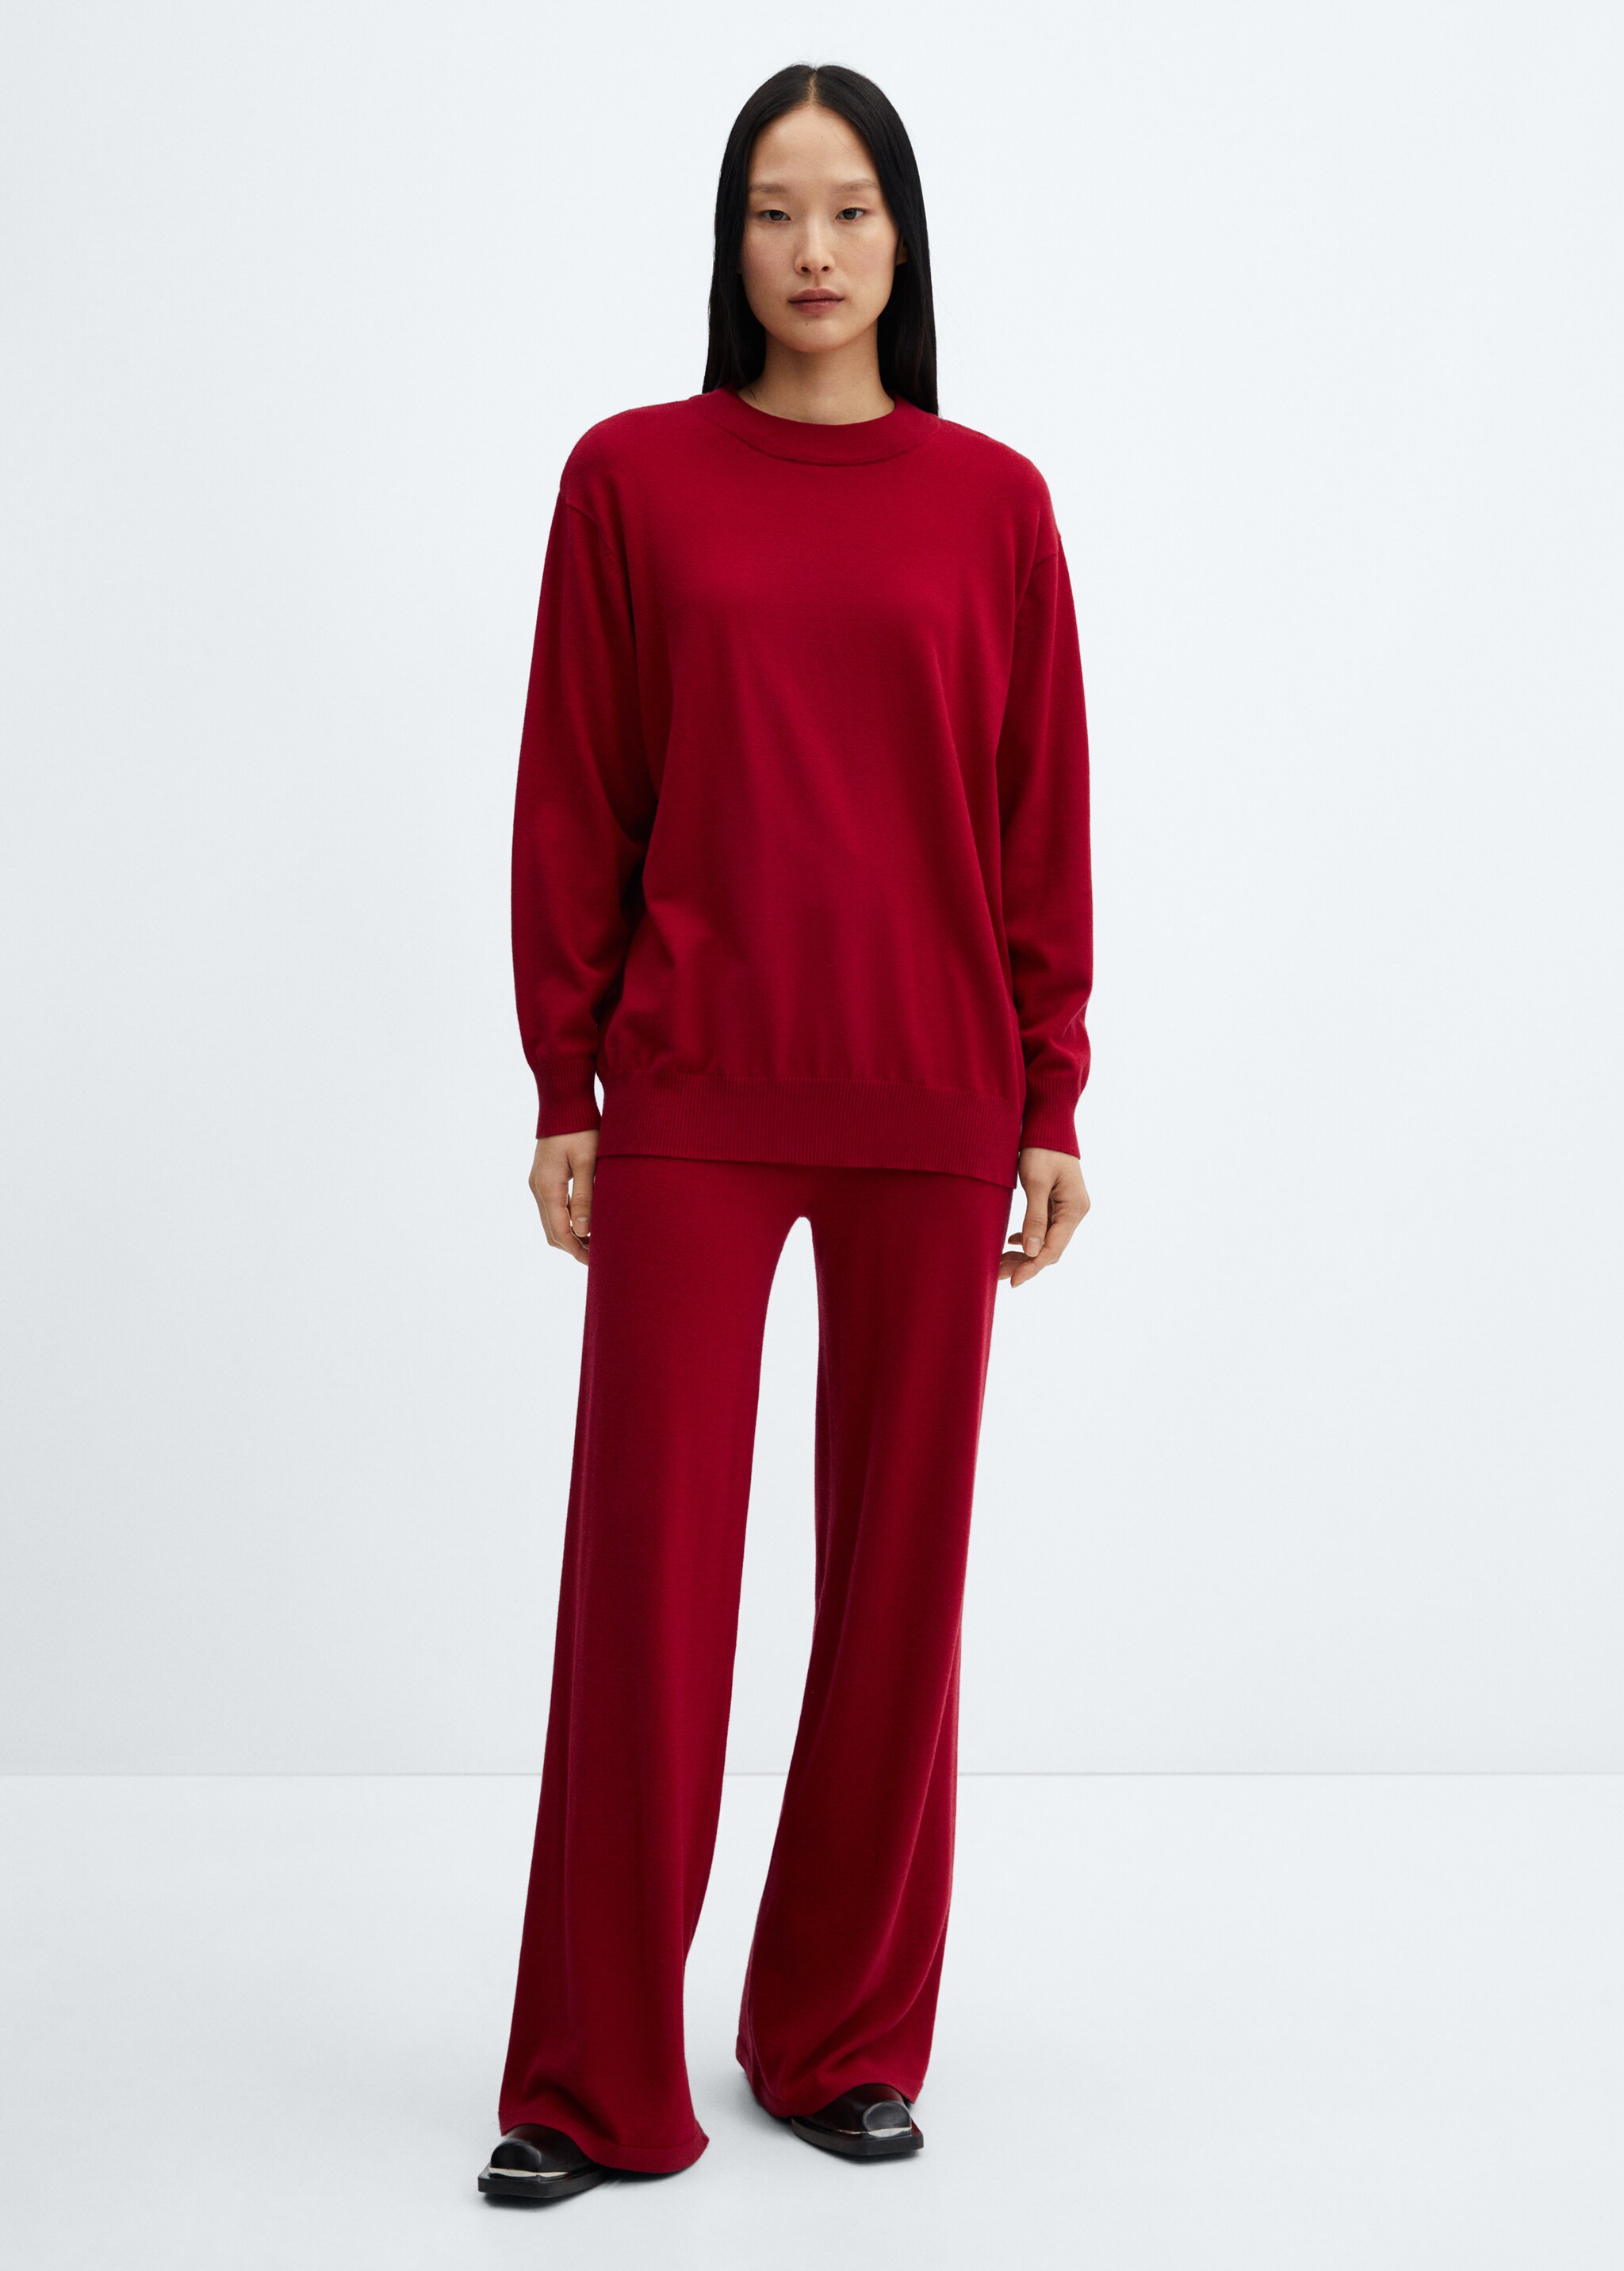 Knitted wideleg trousers - General plane